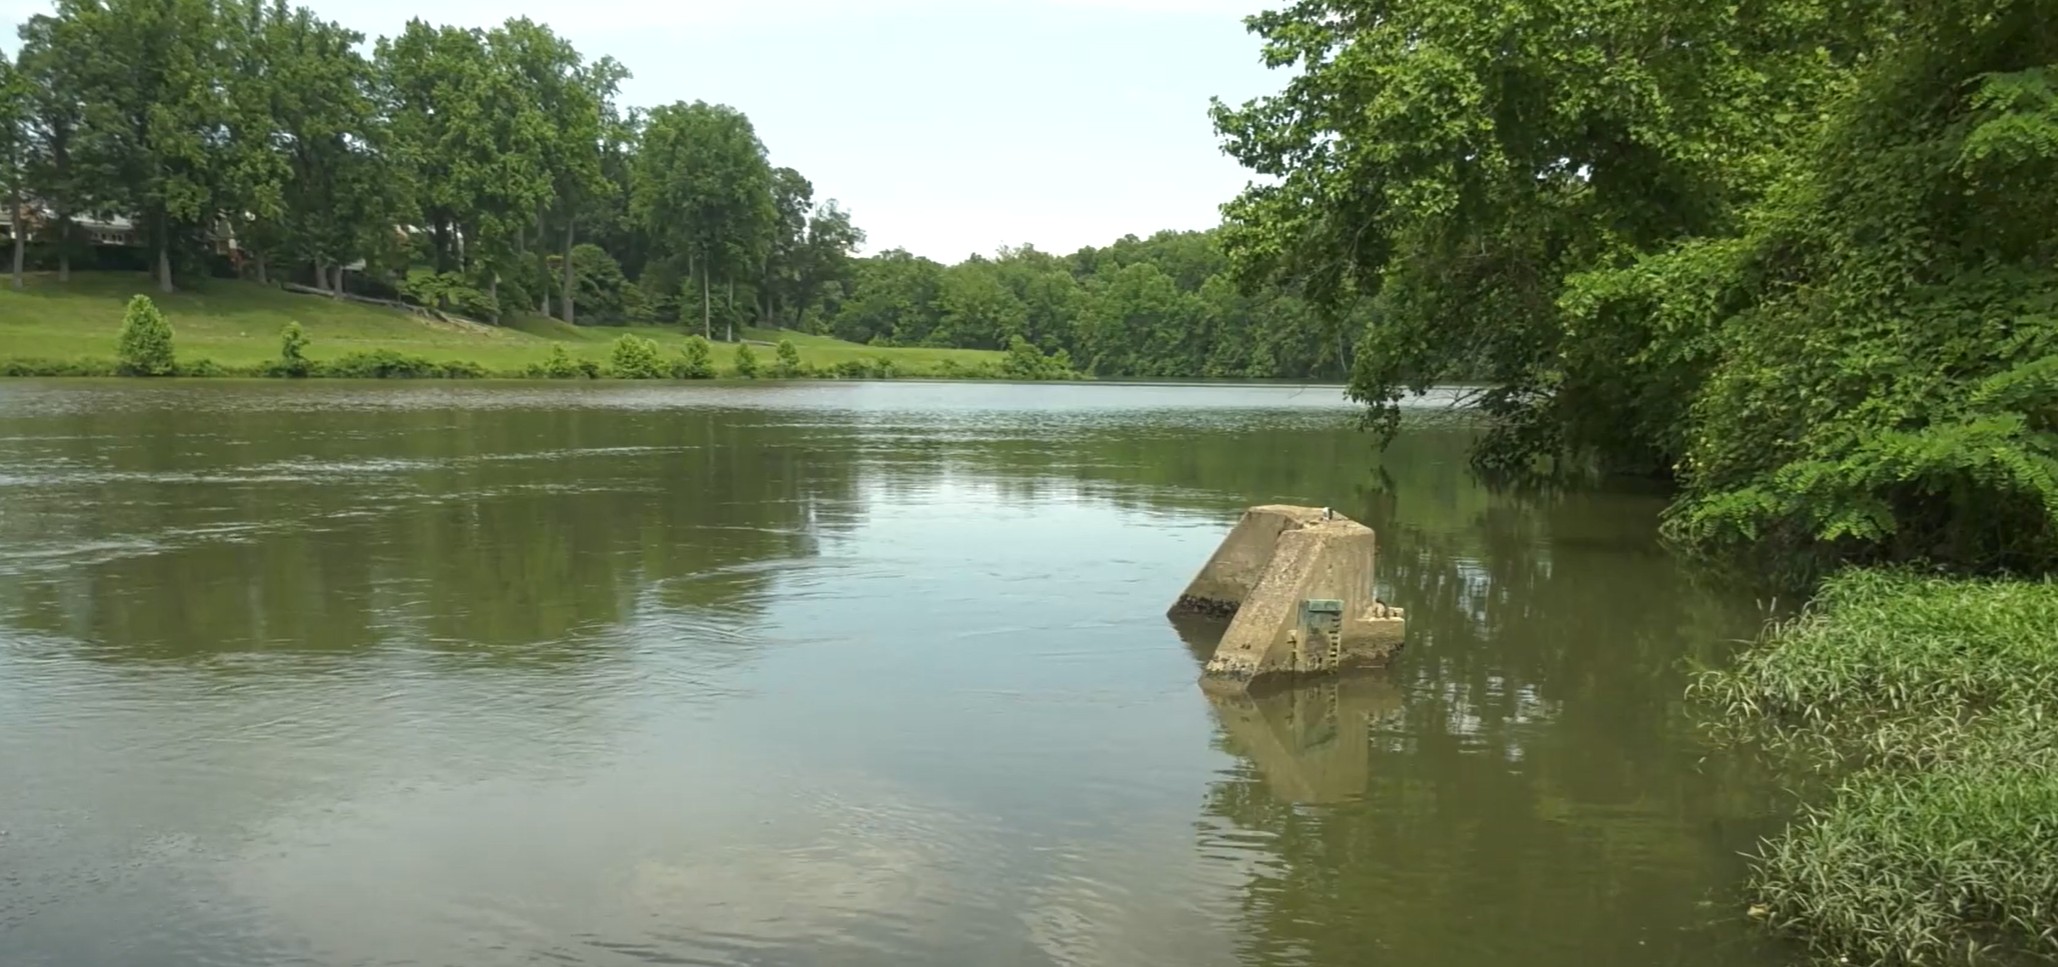 VIDEO: Illegal Discharges from USACE Aqueduct into Potomac